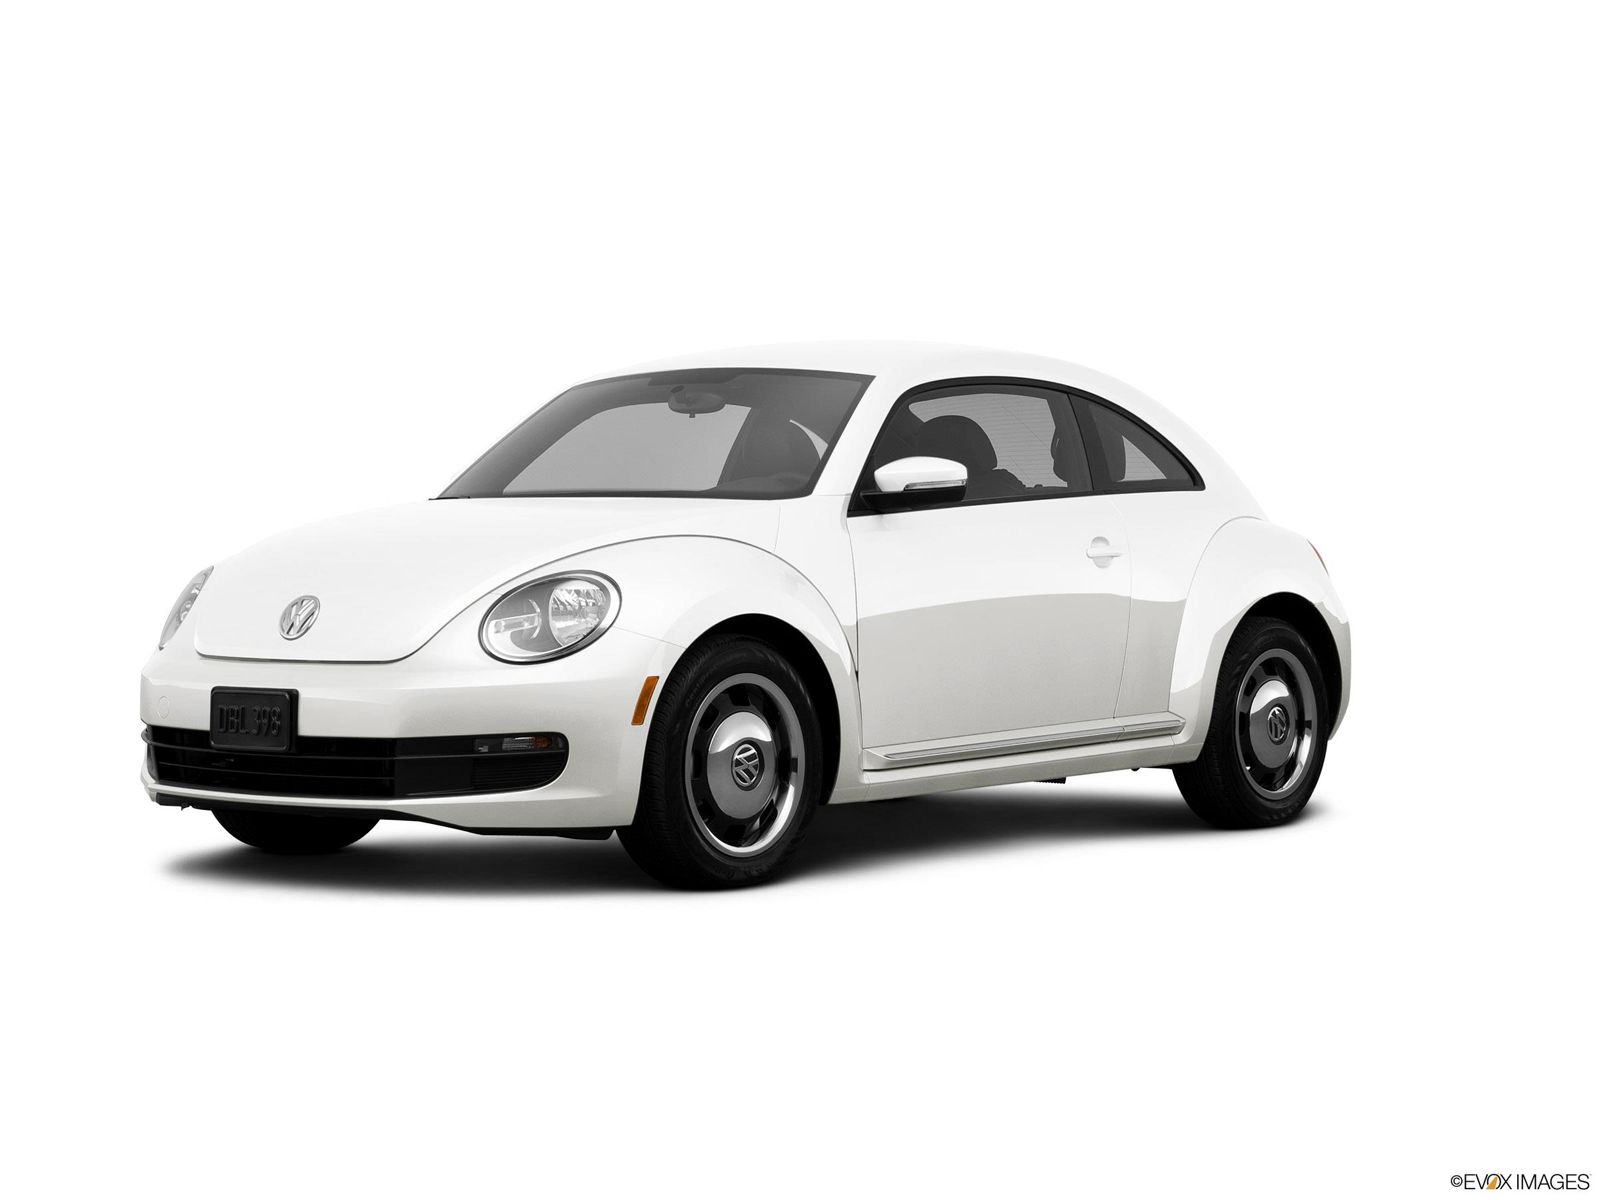 2013 Volkswagen Beetle Research, Photos, Specs and Expertise | CarMax